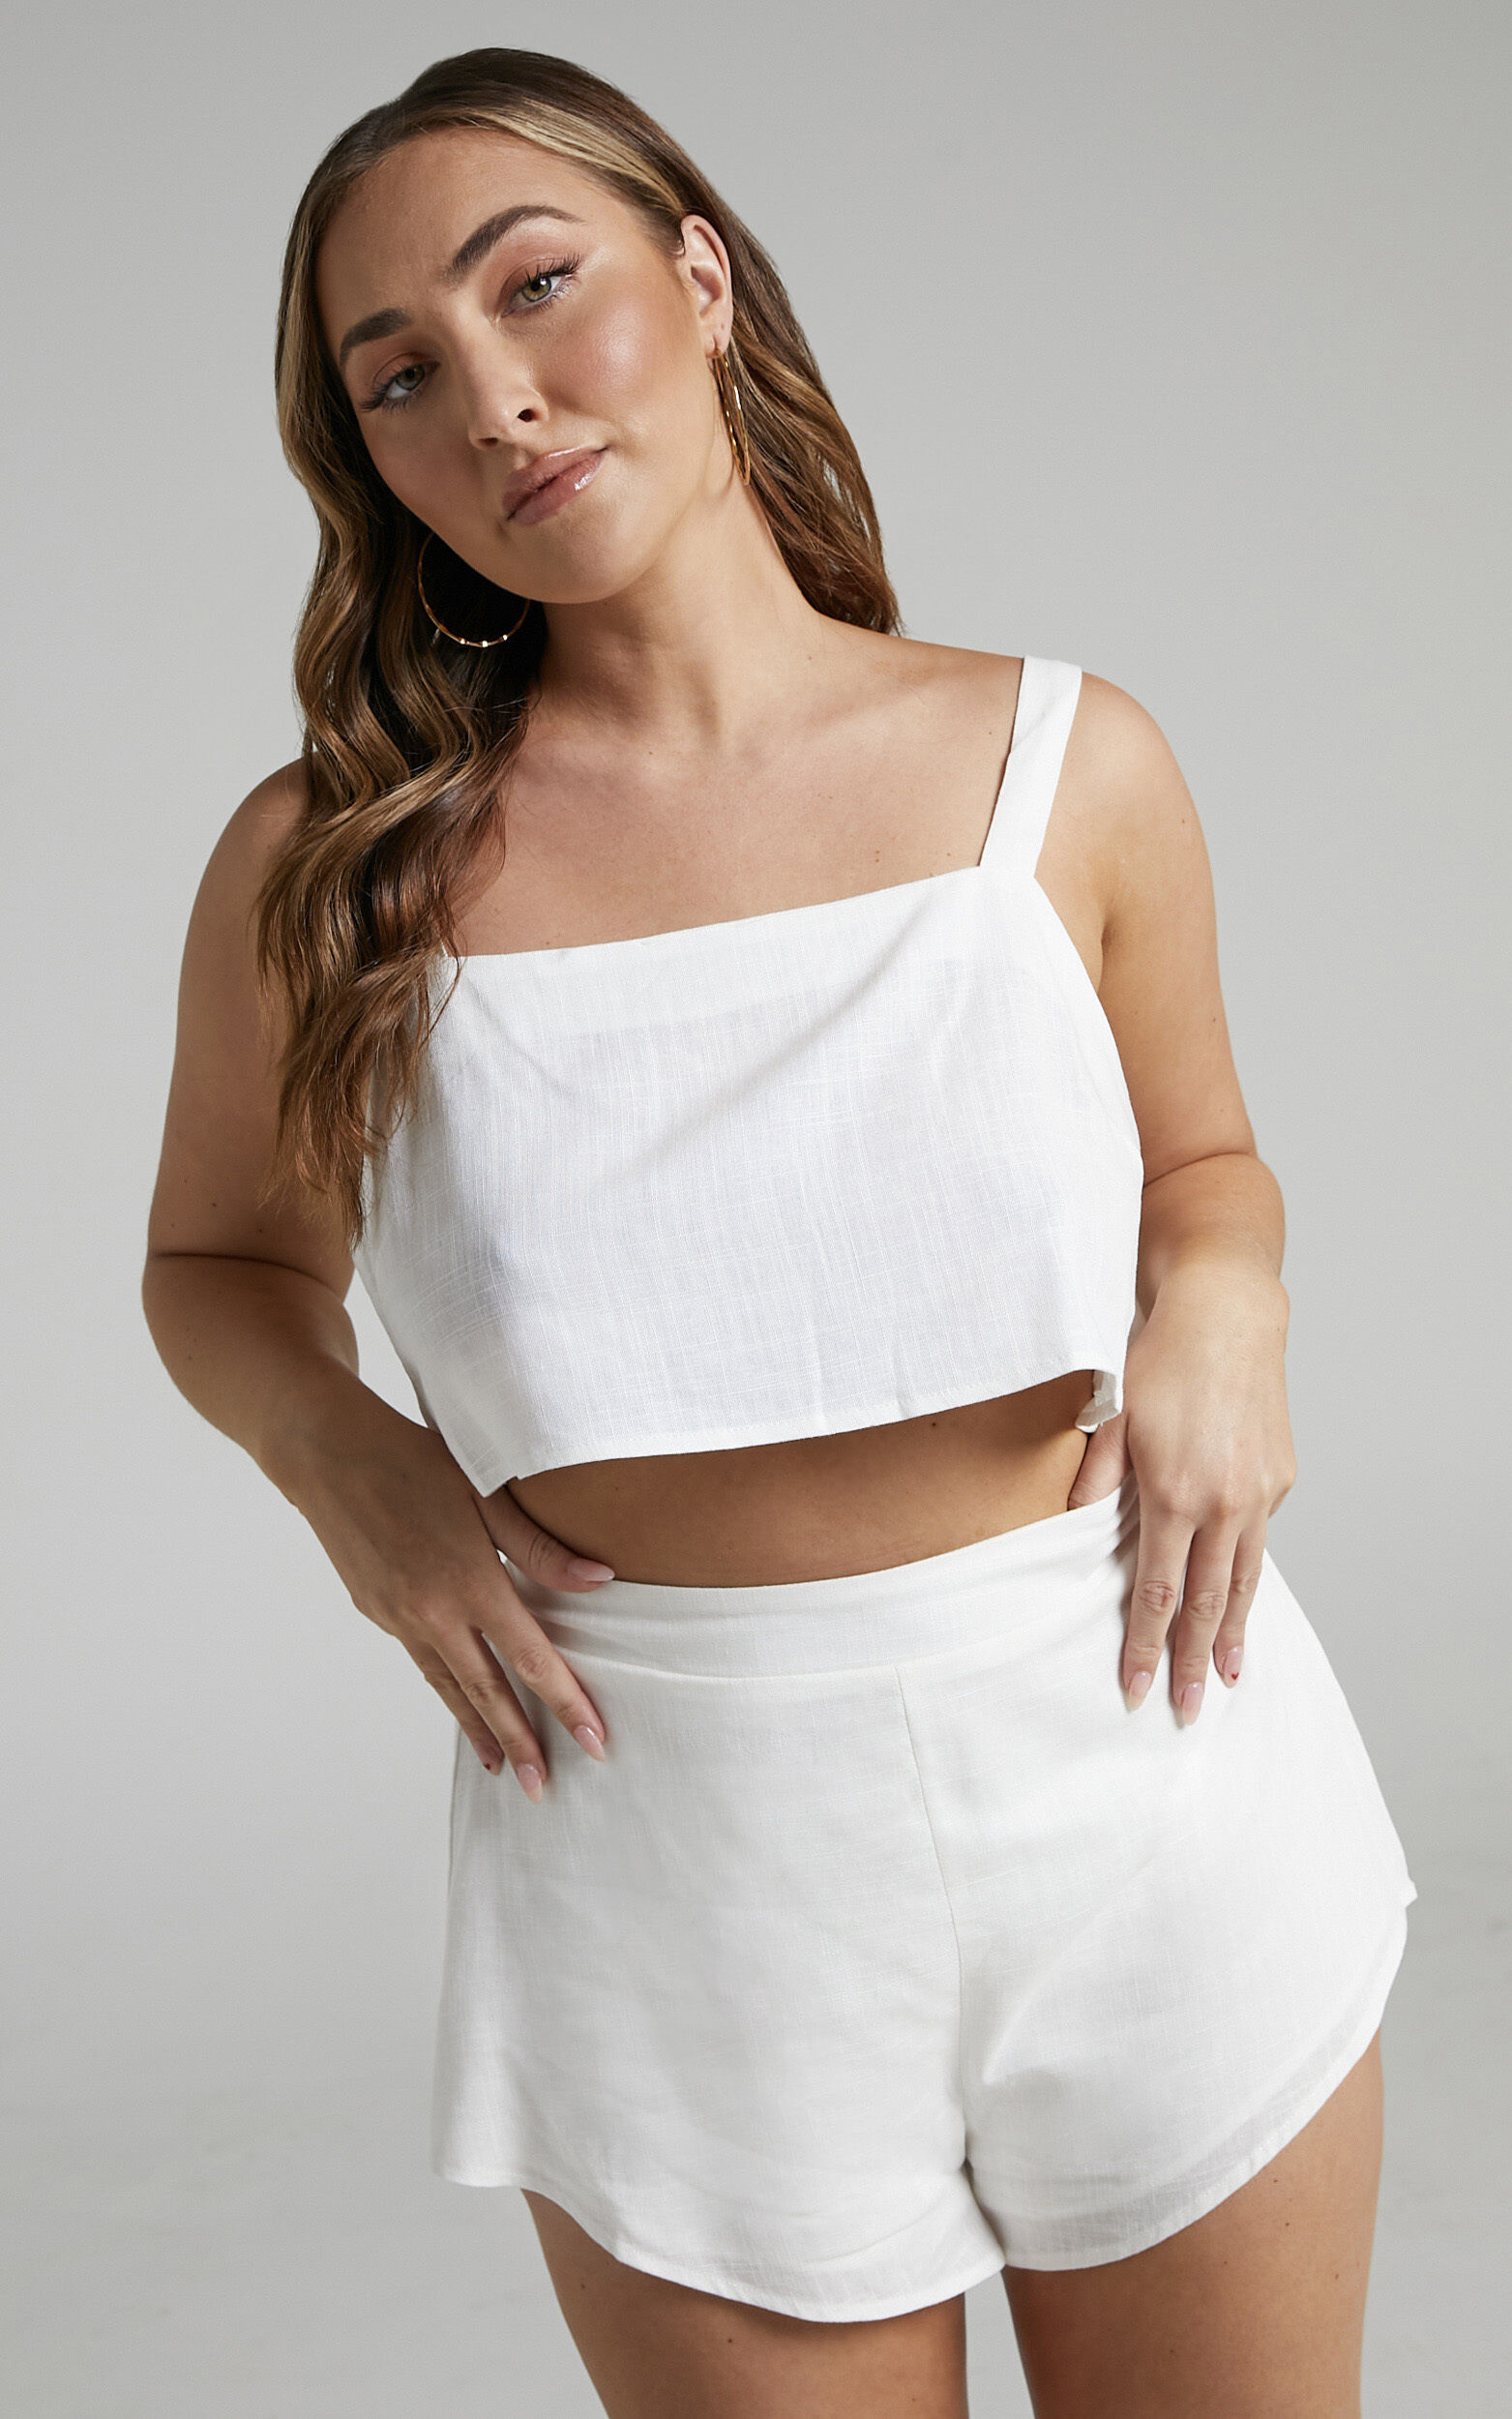 Zanrie Two Piece Set - Square Neck Crop Top and High Waist Mini Flare Shorts Set in White Linen Look - 14, WHT5